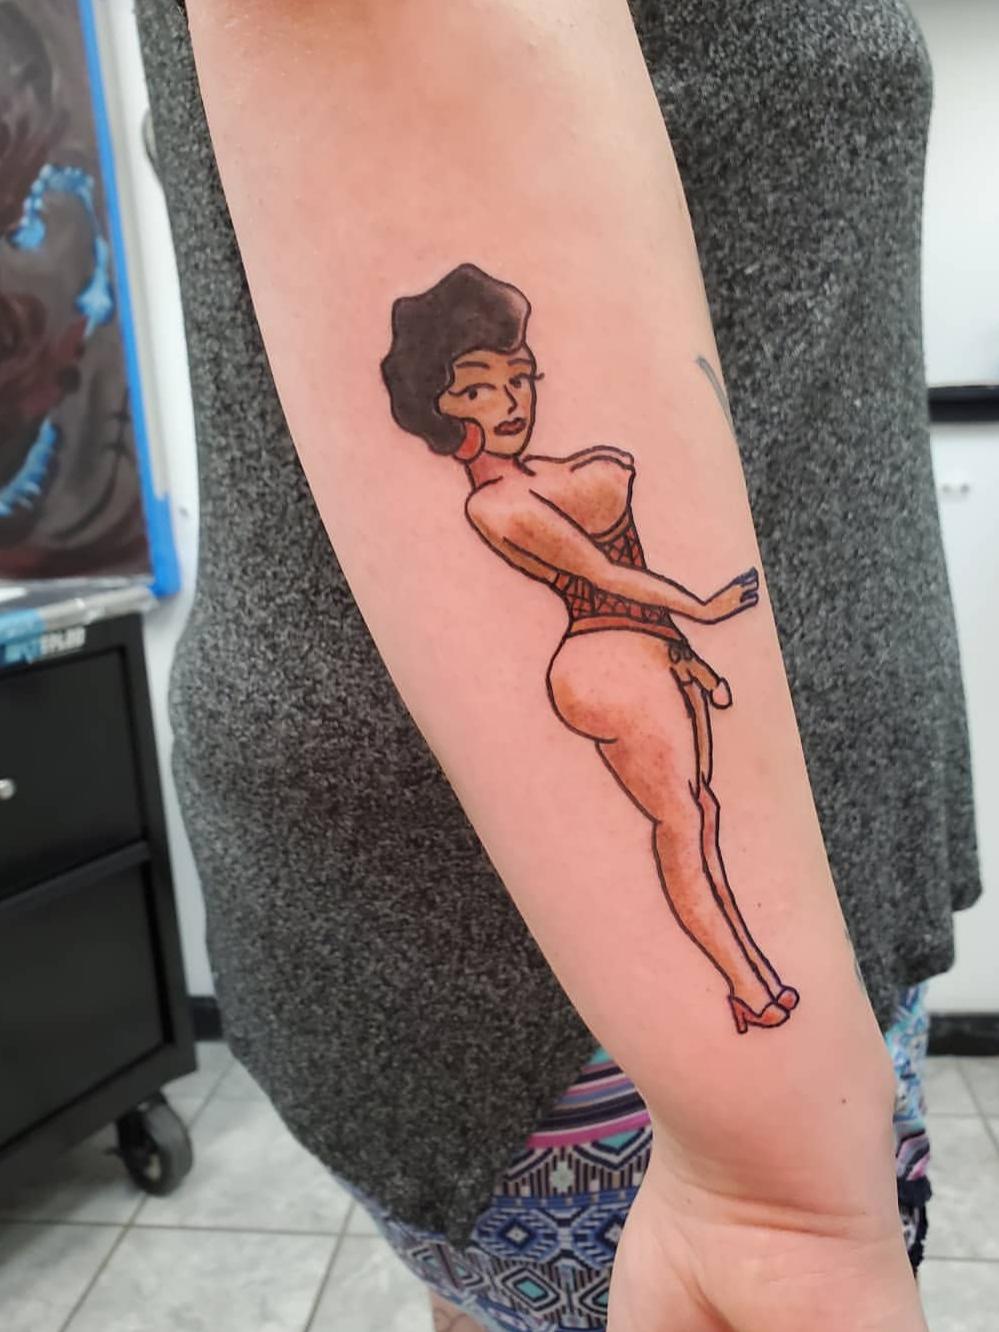 Pornographic Tattoos - You Should Be 18 To View This Mess. 15 Of The Most Trashy And Pornographic  Tattoos People Are Proud To Wear. - fools boneheads and jackasses